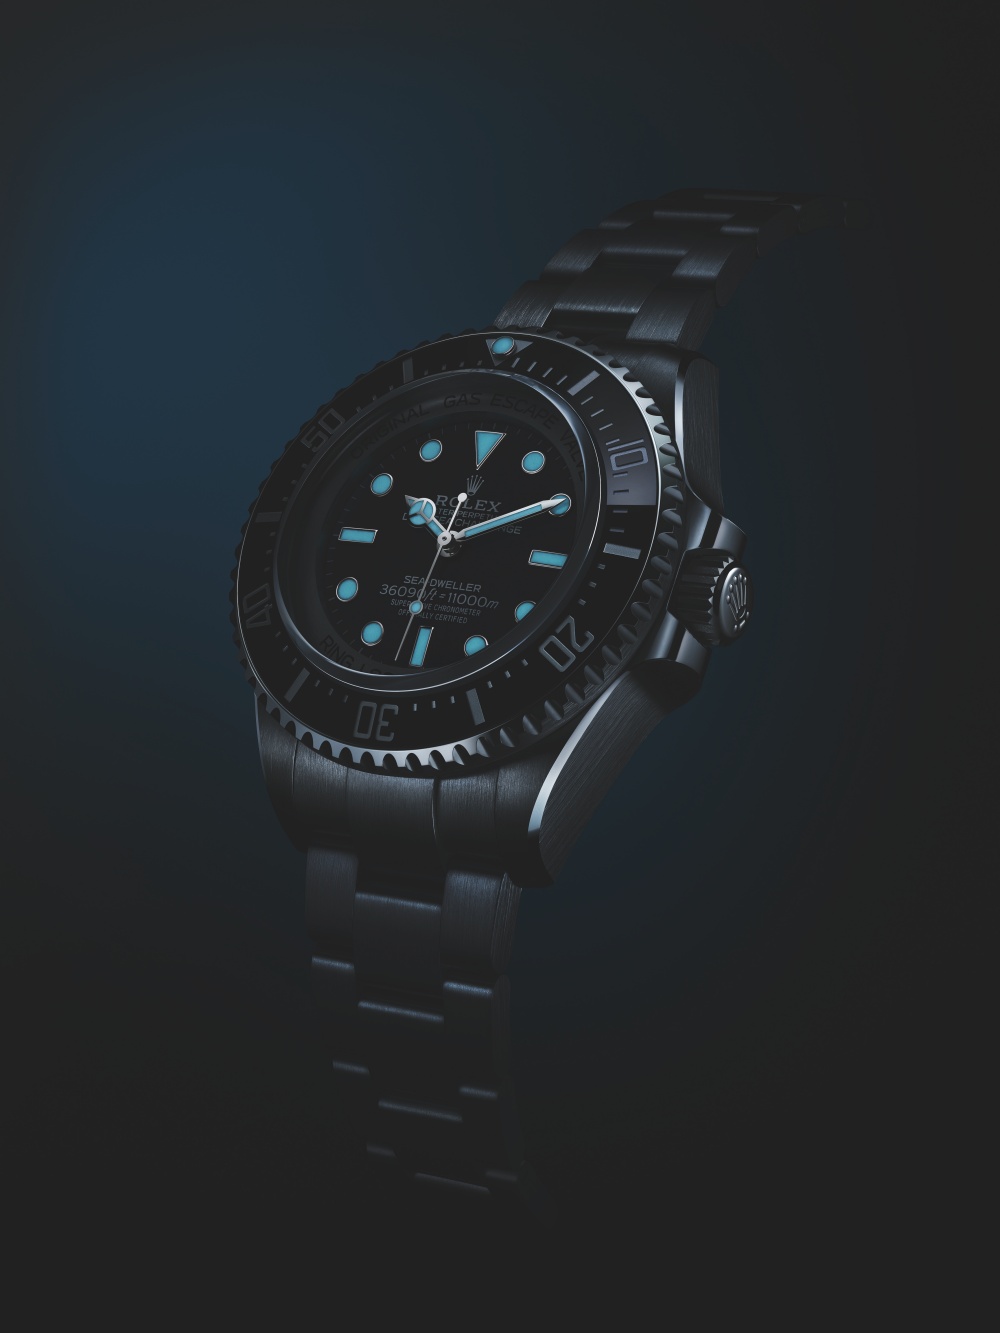 Đồng hồ Oyster Perpetual Deepsea Challenge